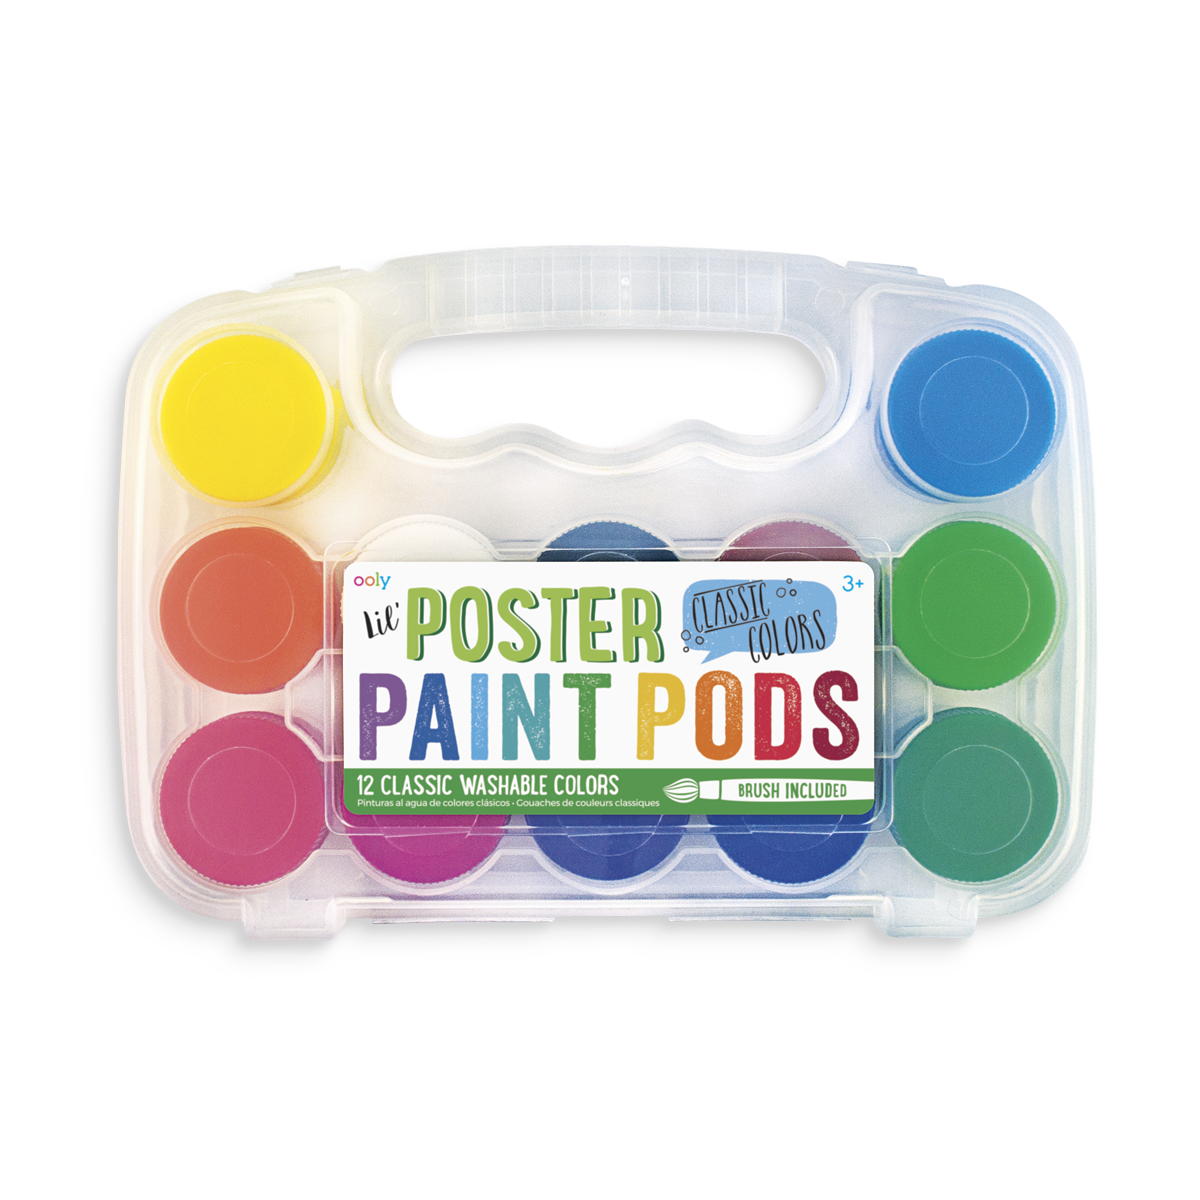 lil Poster Paint Pod set with 12 poster paint colors and a paintbrush